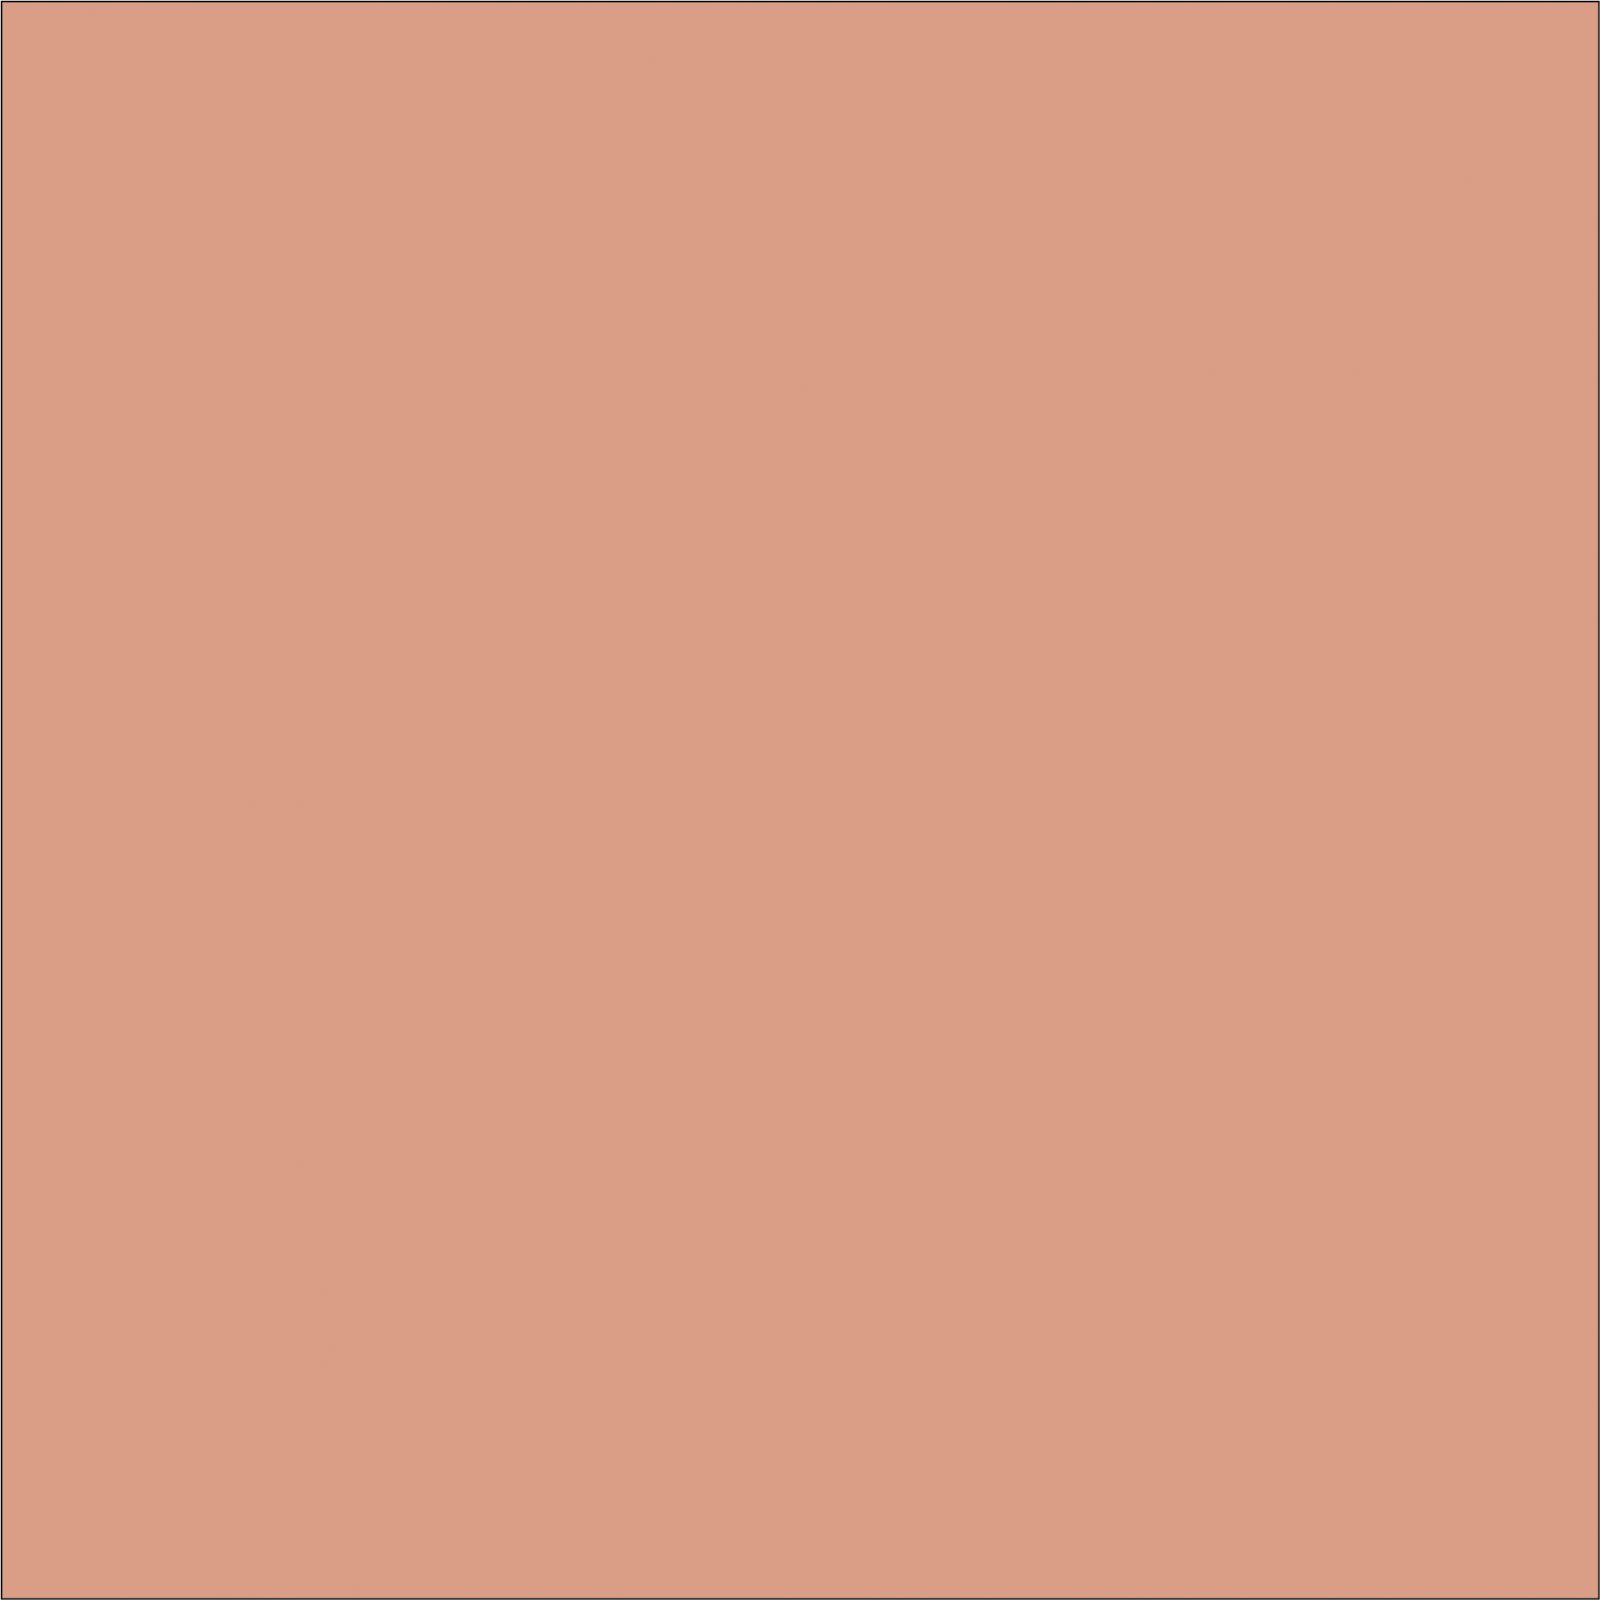 Colour swatch of Red Sandstone